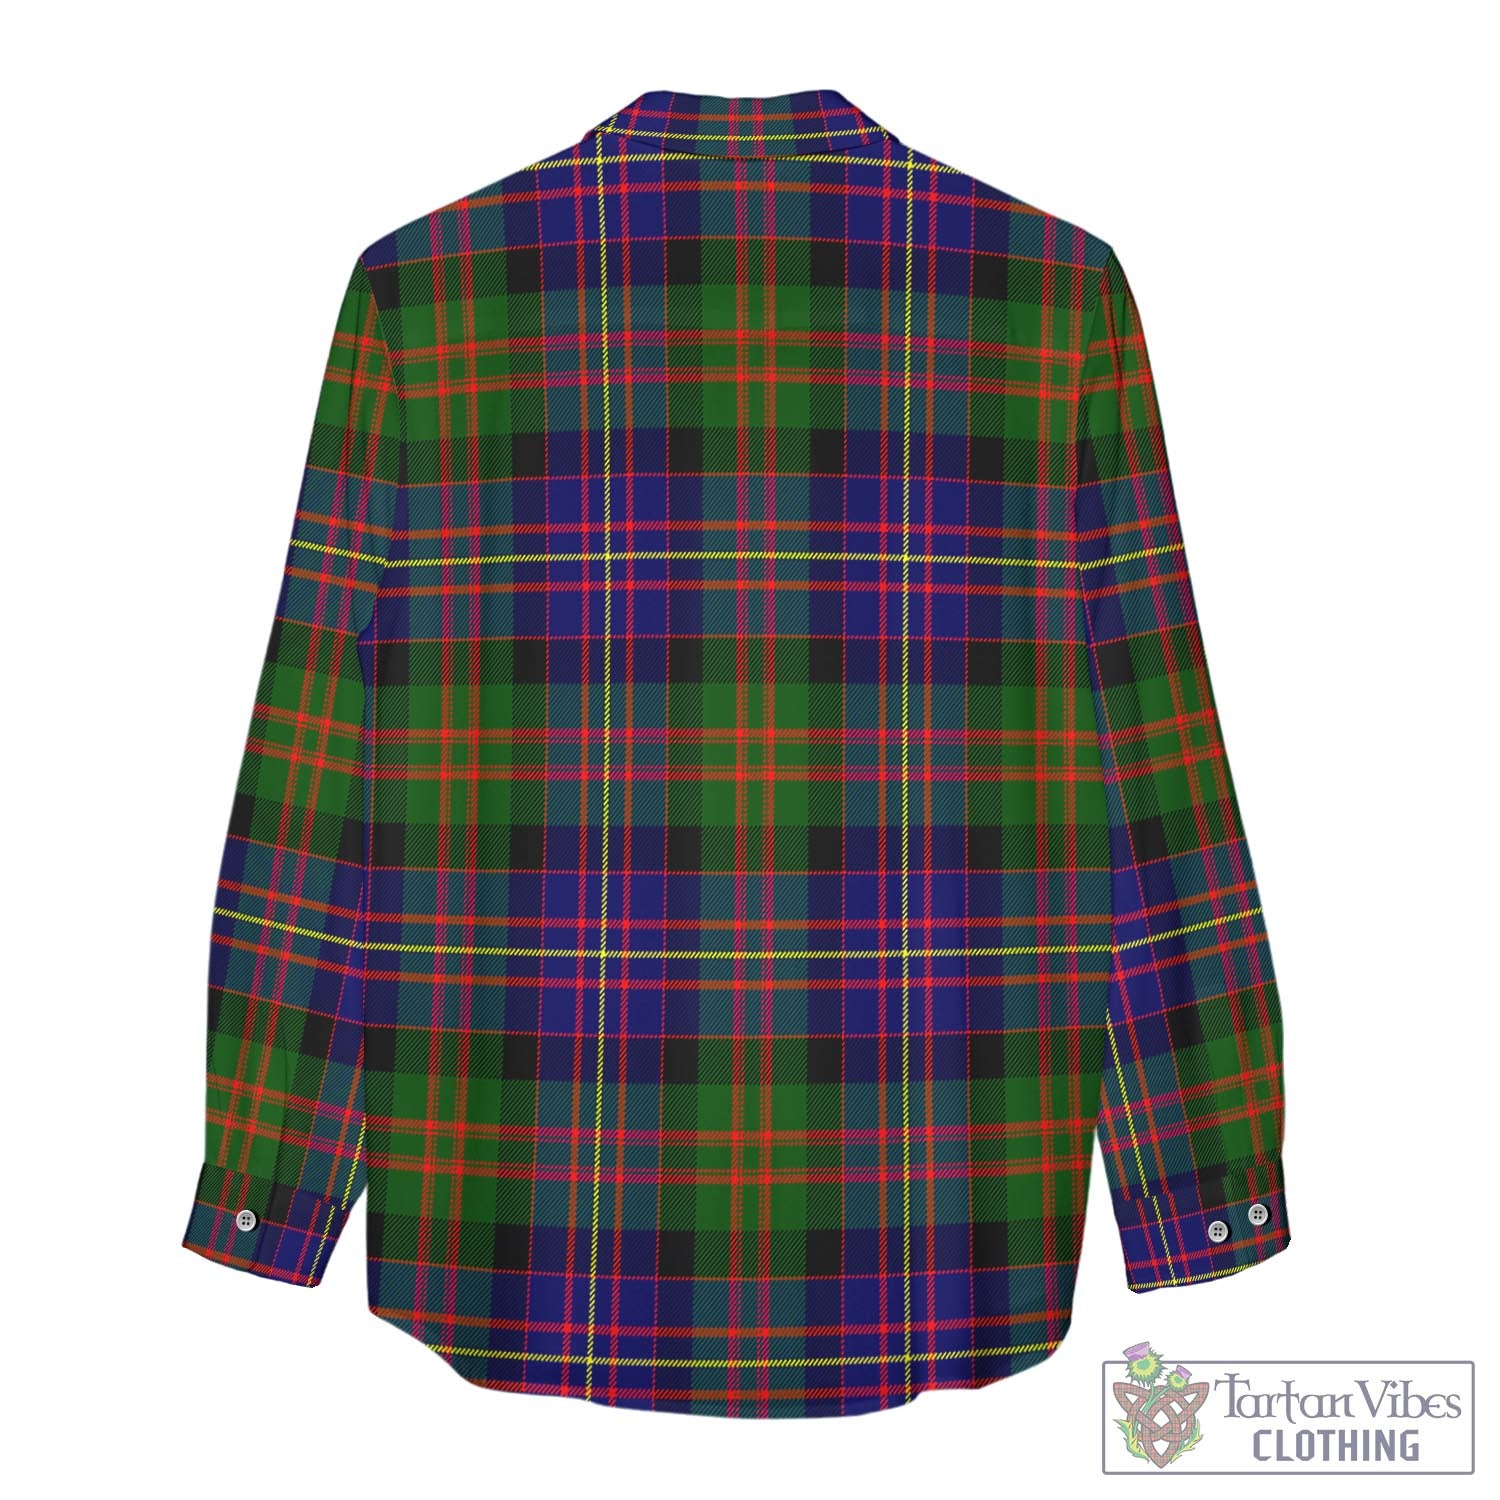 Tartan Vibes Clothing Chalmers Modern Tartan Womens Casual Shirt with Family Crest